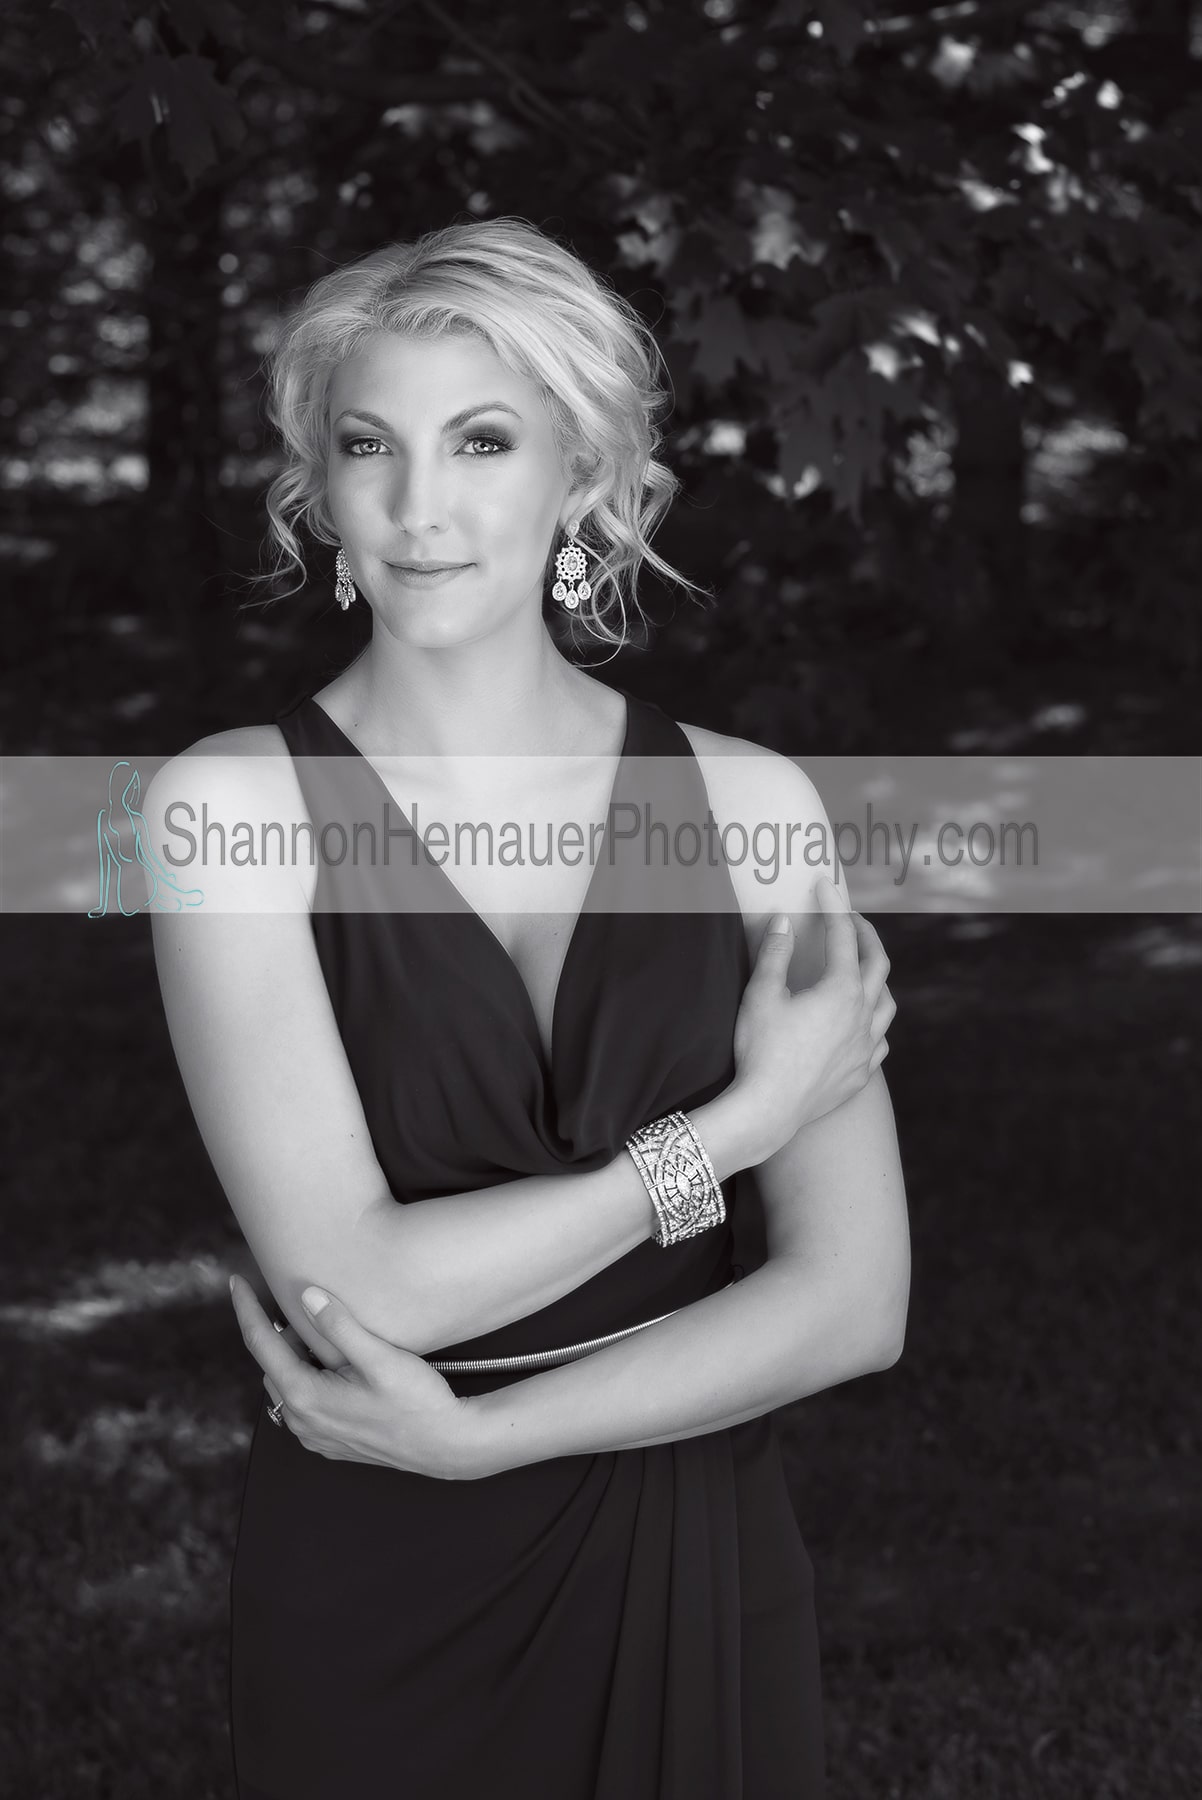 Contemporary Glamour | Shannon Hemauer Photography Gettysburg pA